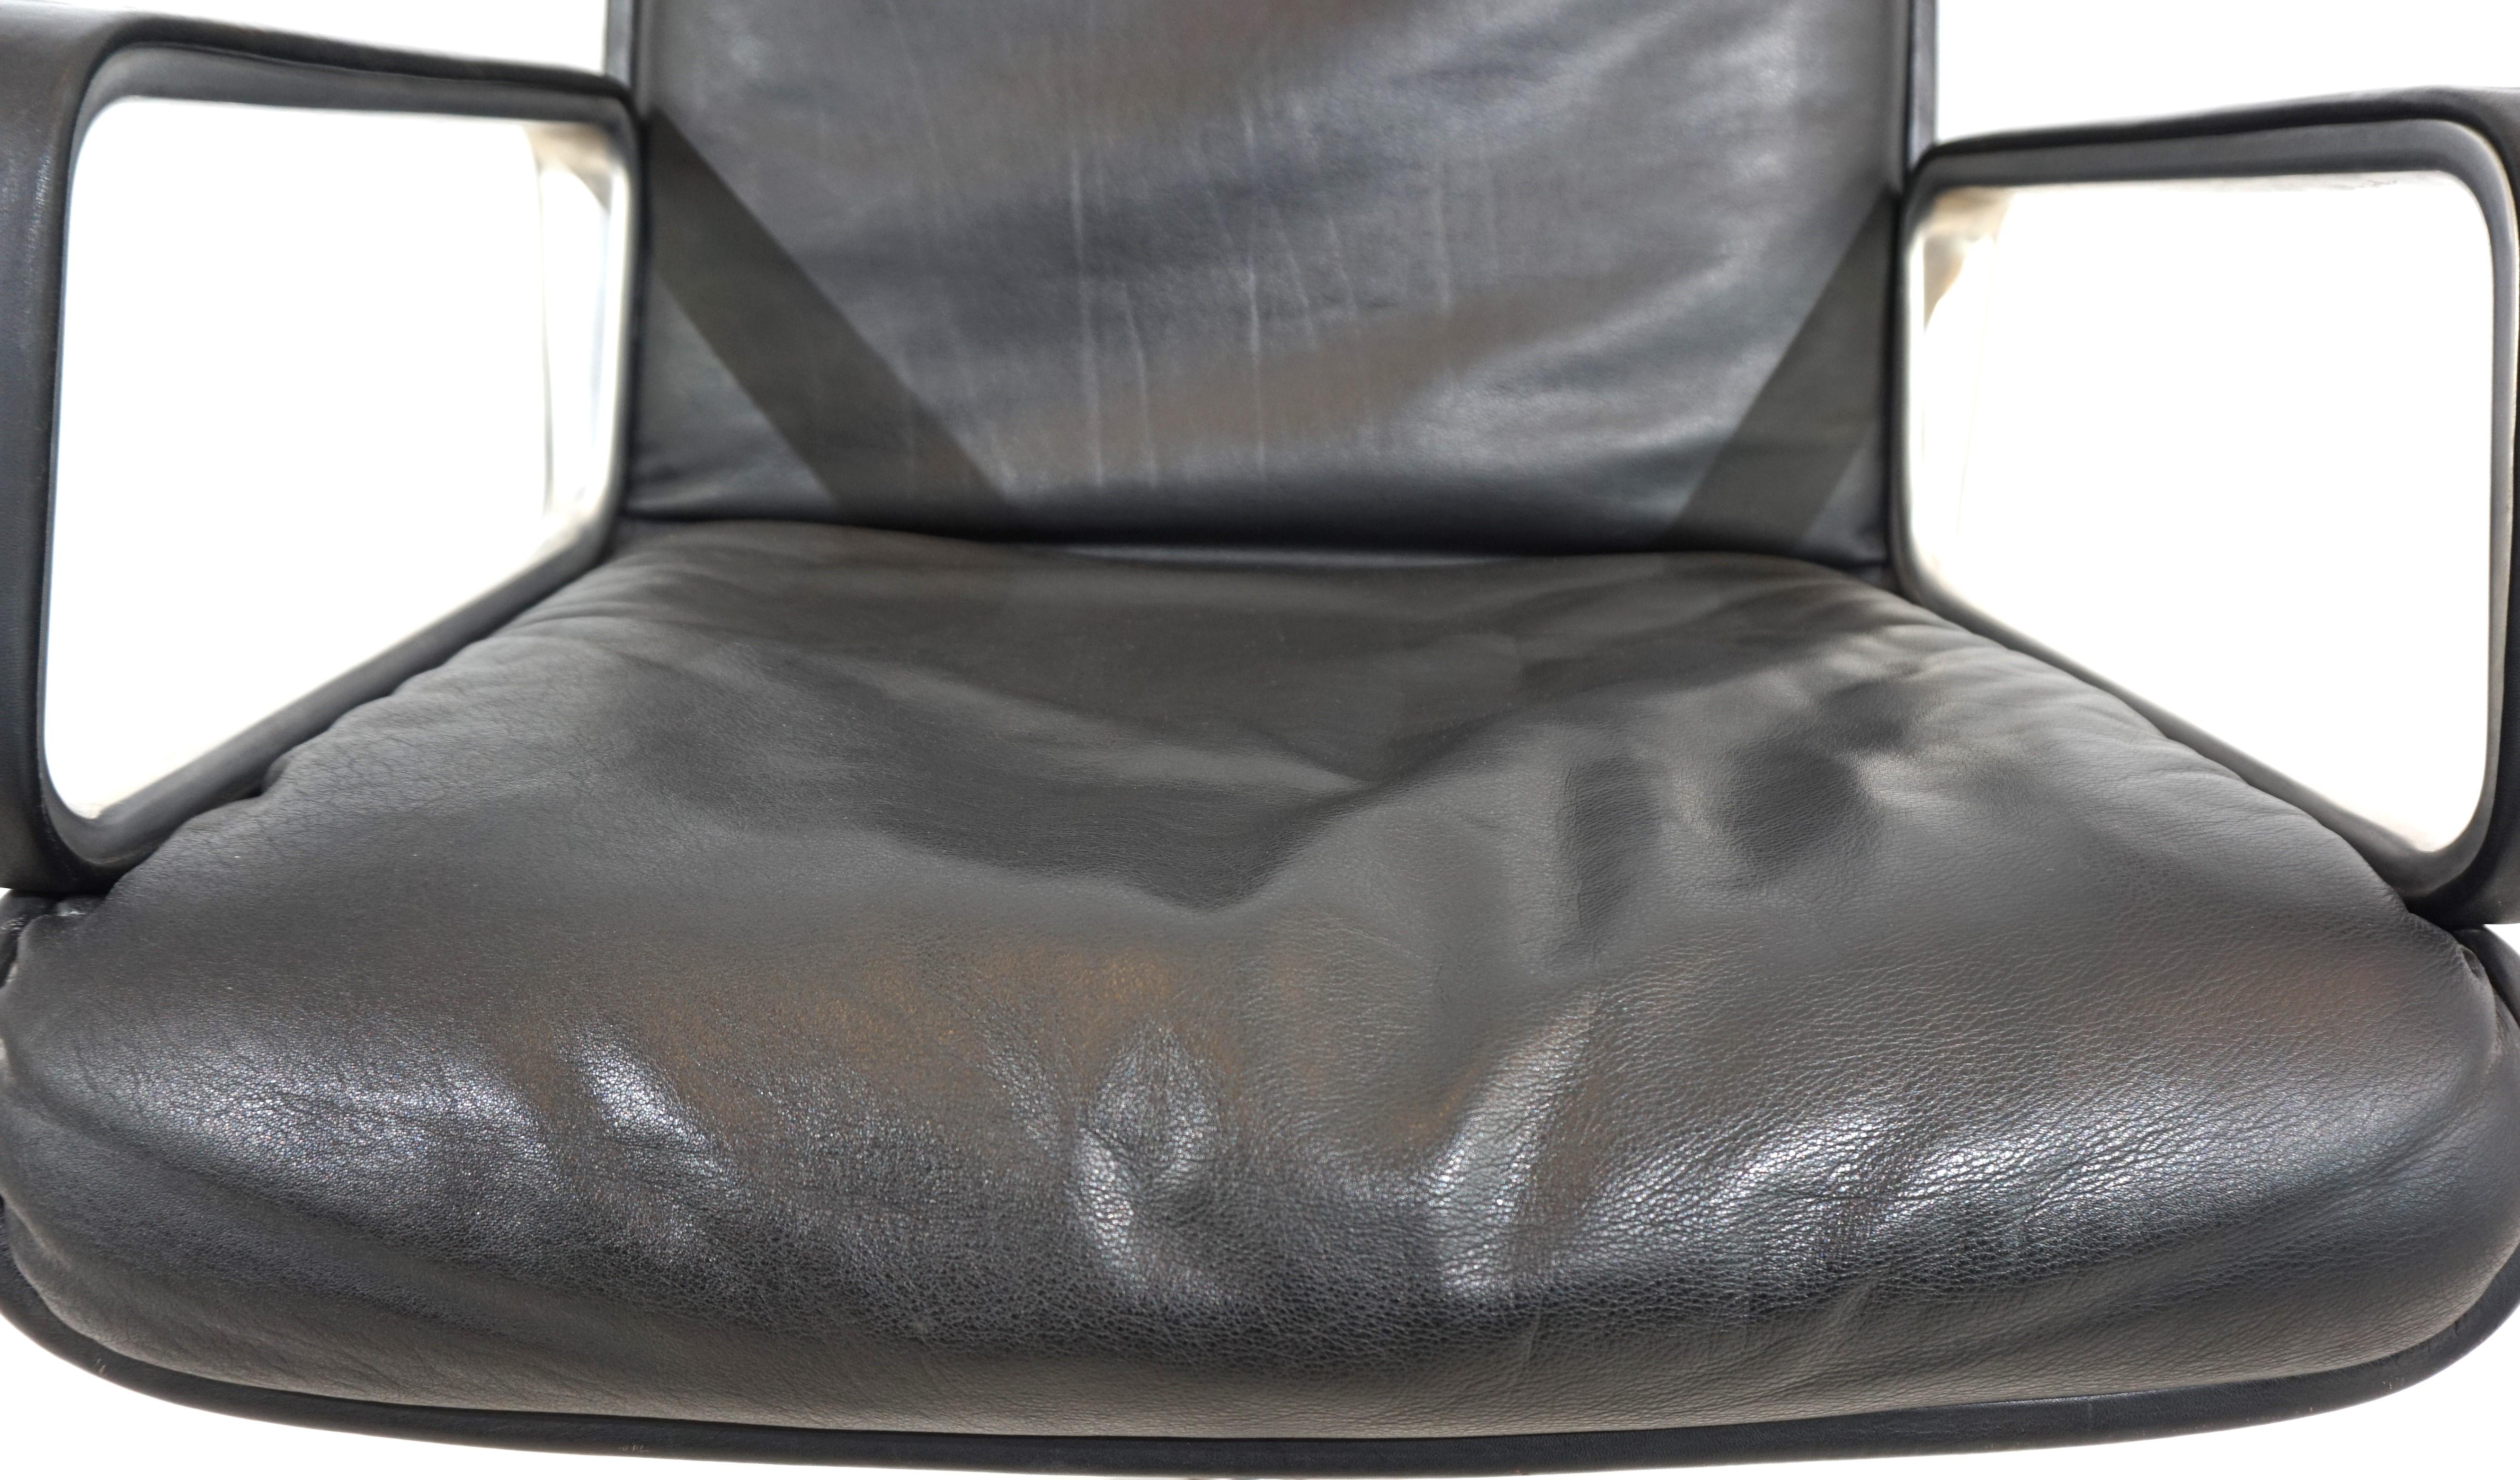 Wilkhahn Delta leather dining/conference chair from Delta Design 4